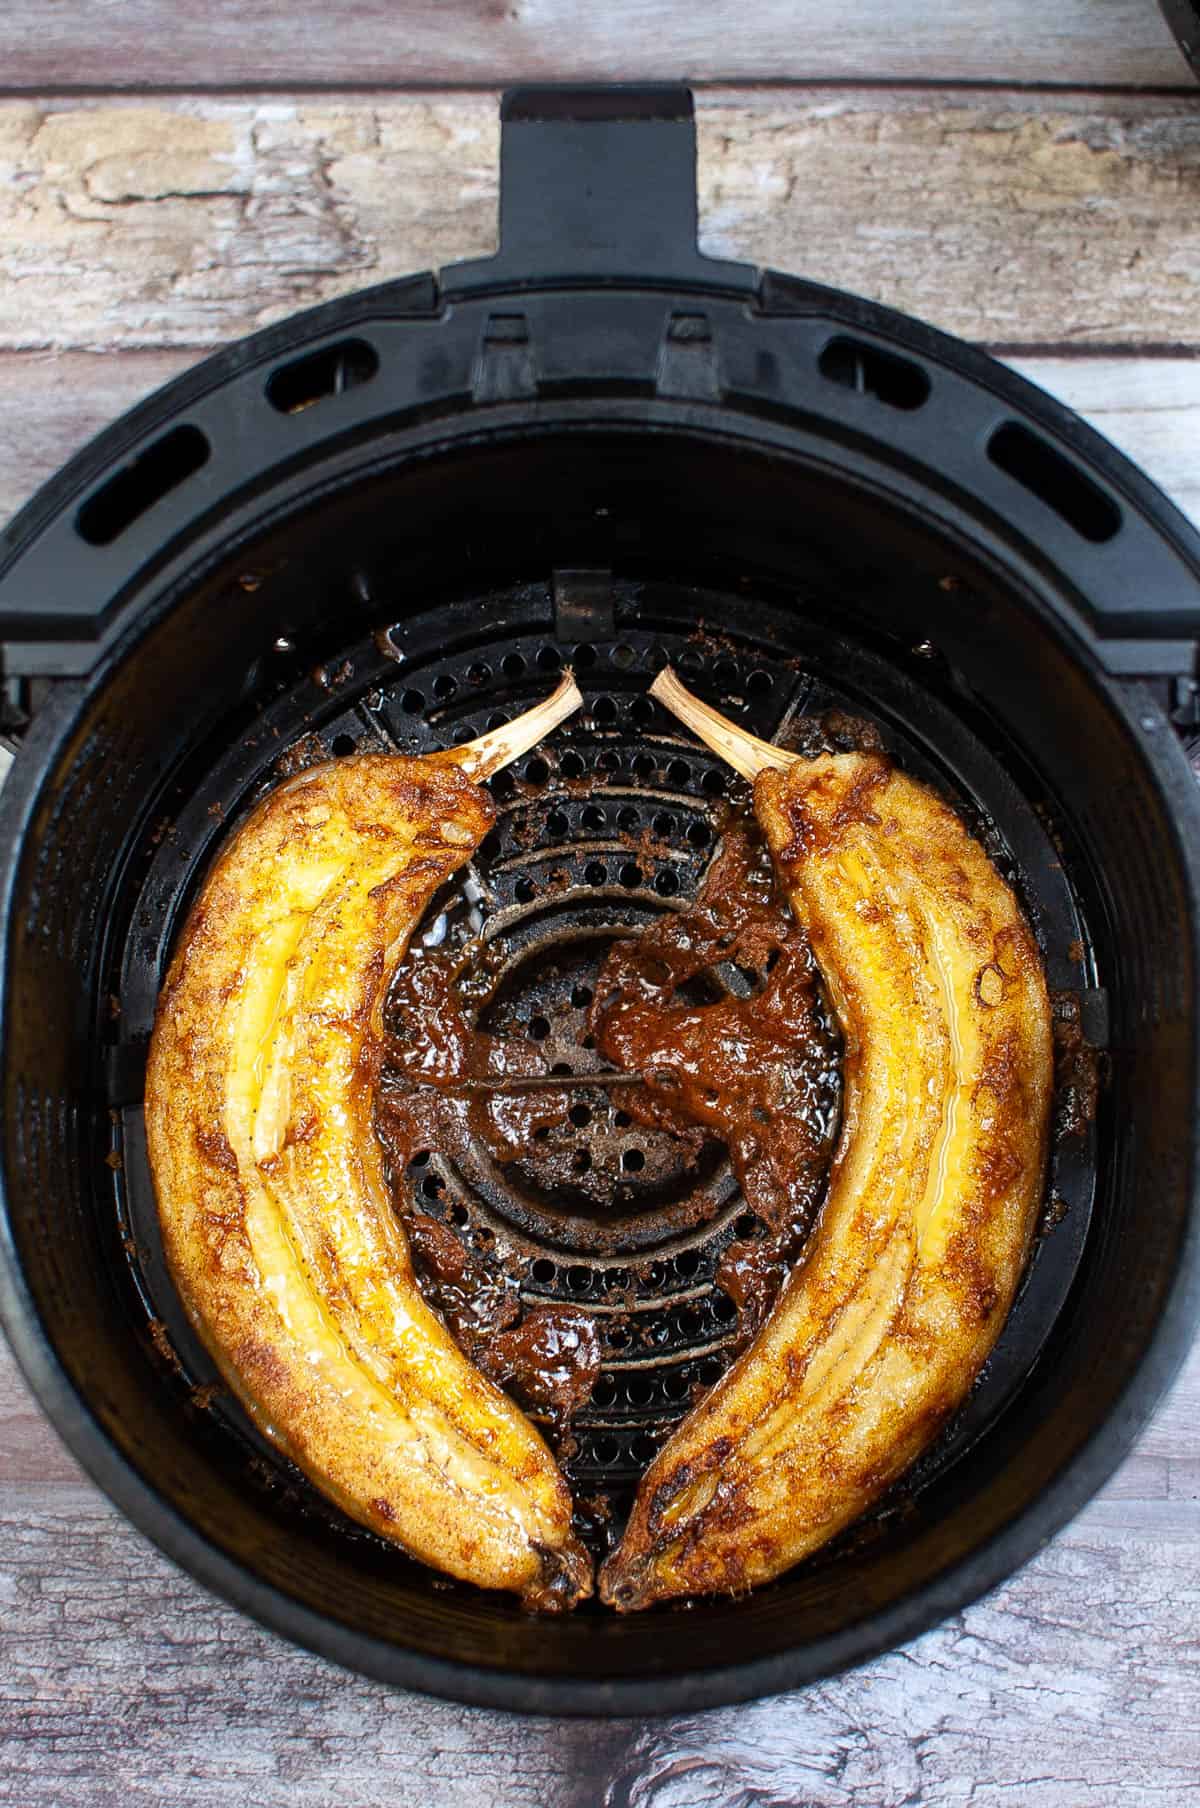 cooked bananas in the air fryer basket.